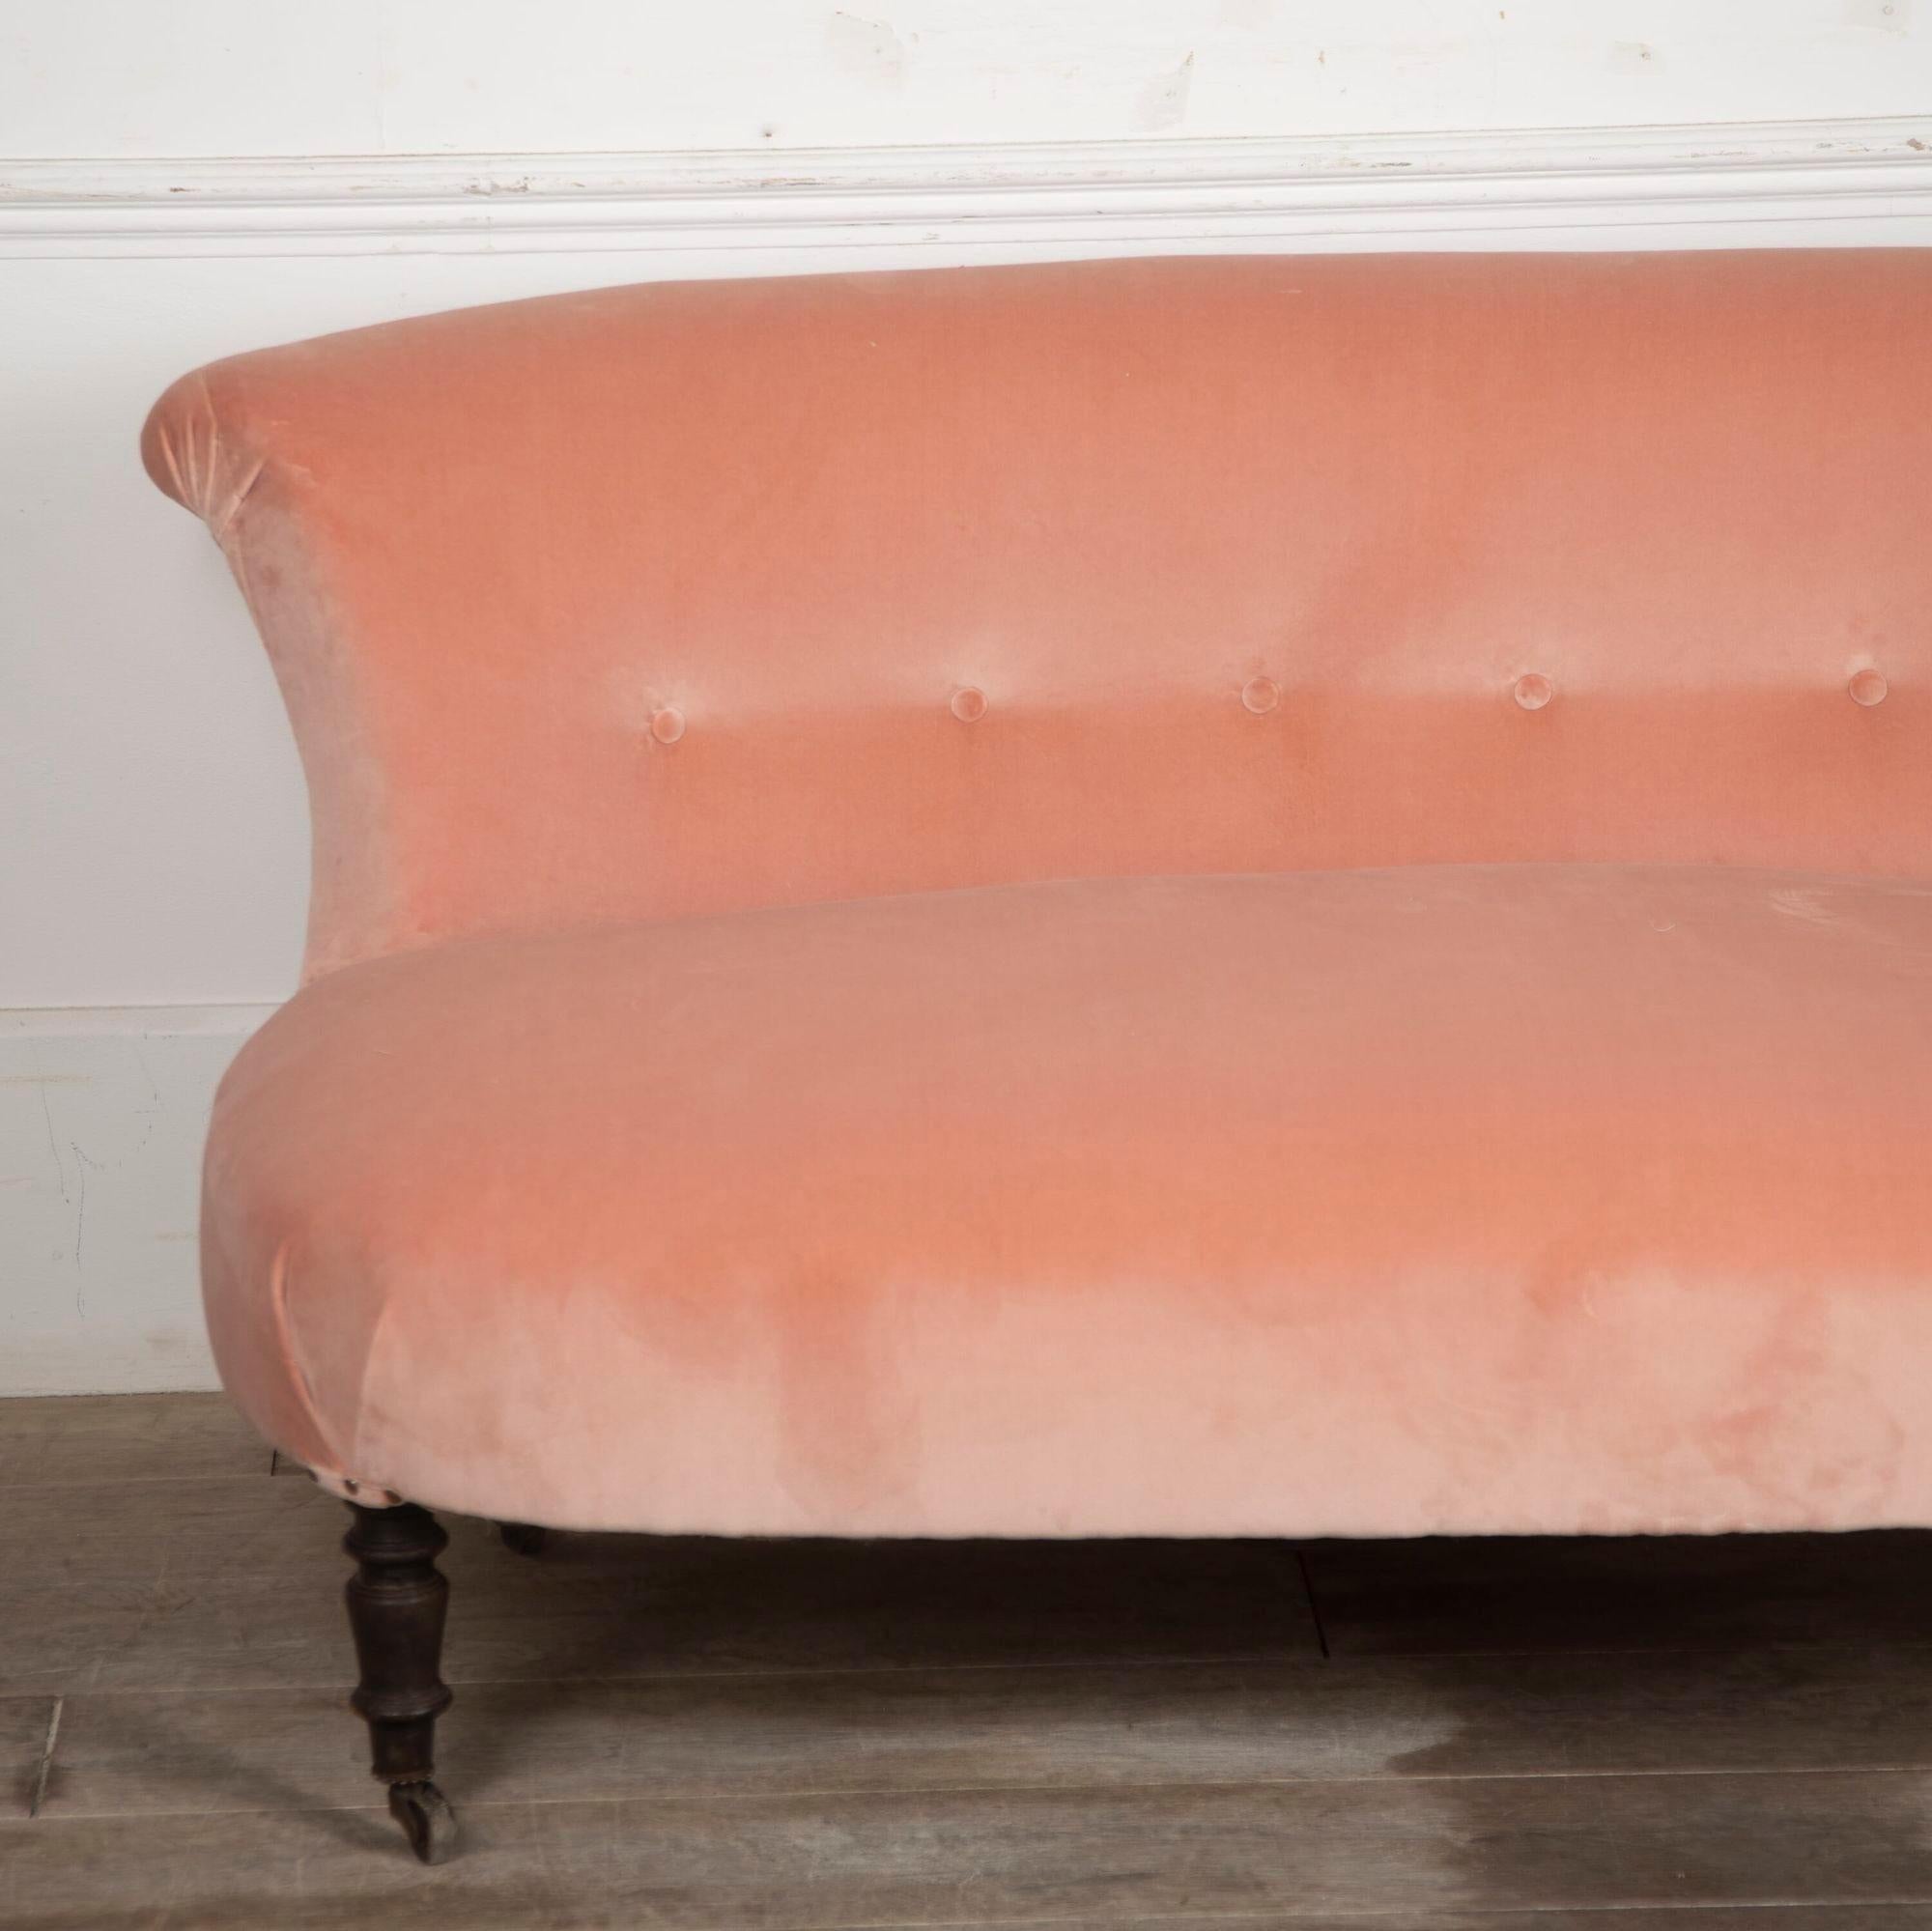 19th Century French chaise longue covered in pink velvet.
In good structural condition for its age with a lovely button-back and contemporary fabric throughout. 
Perfect for a bedroom or snug.